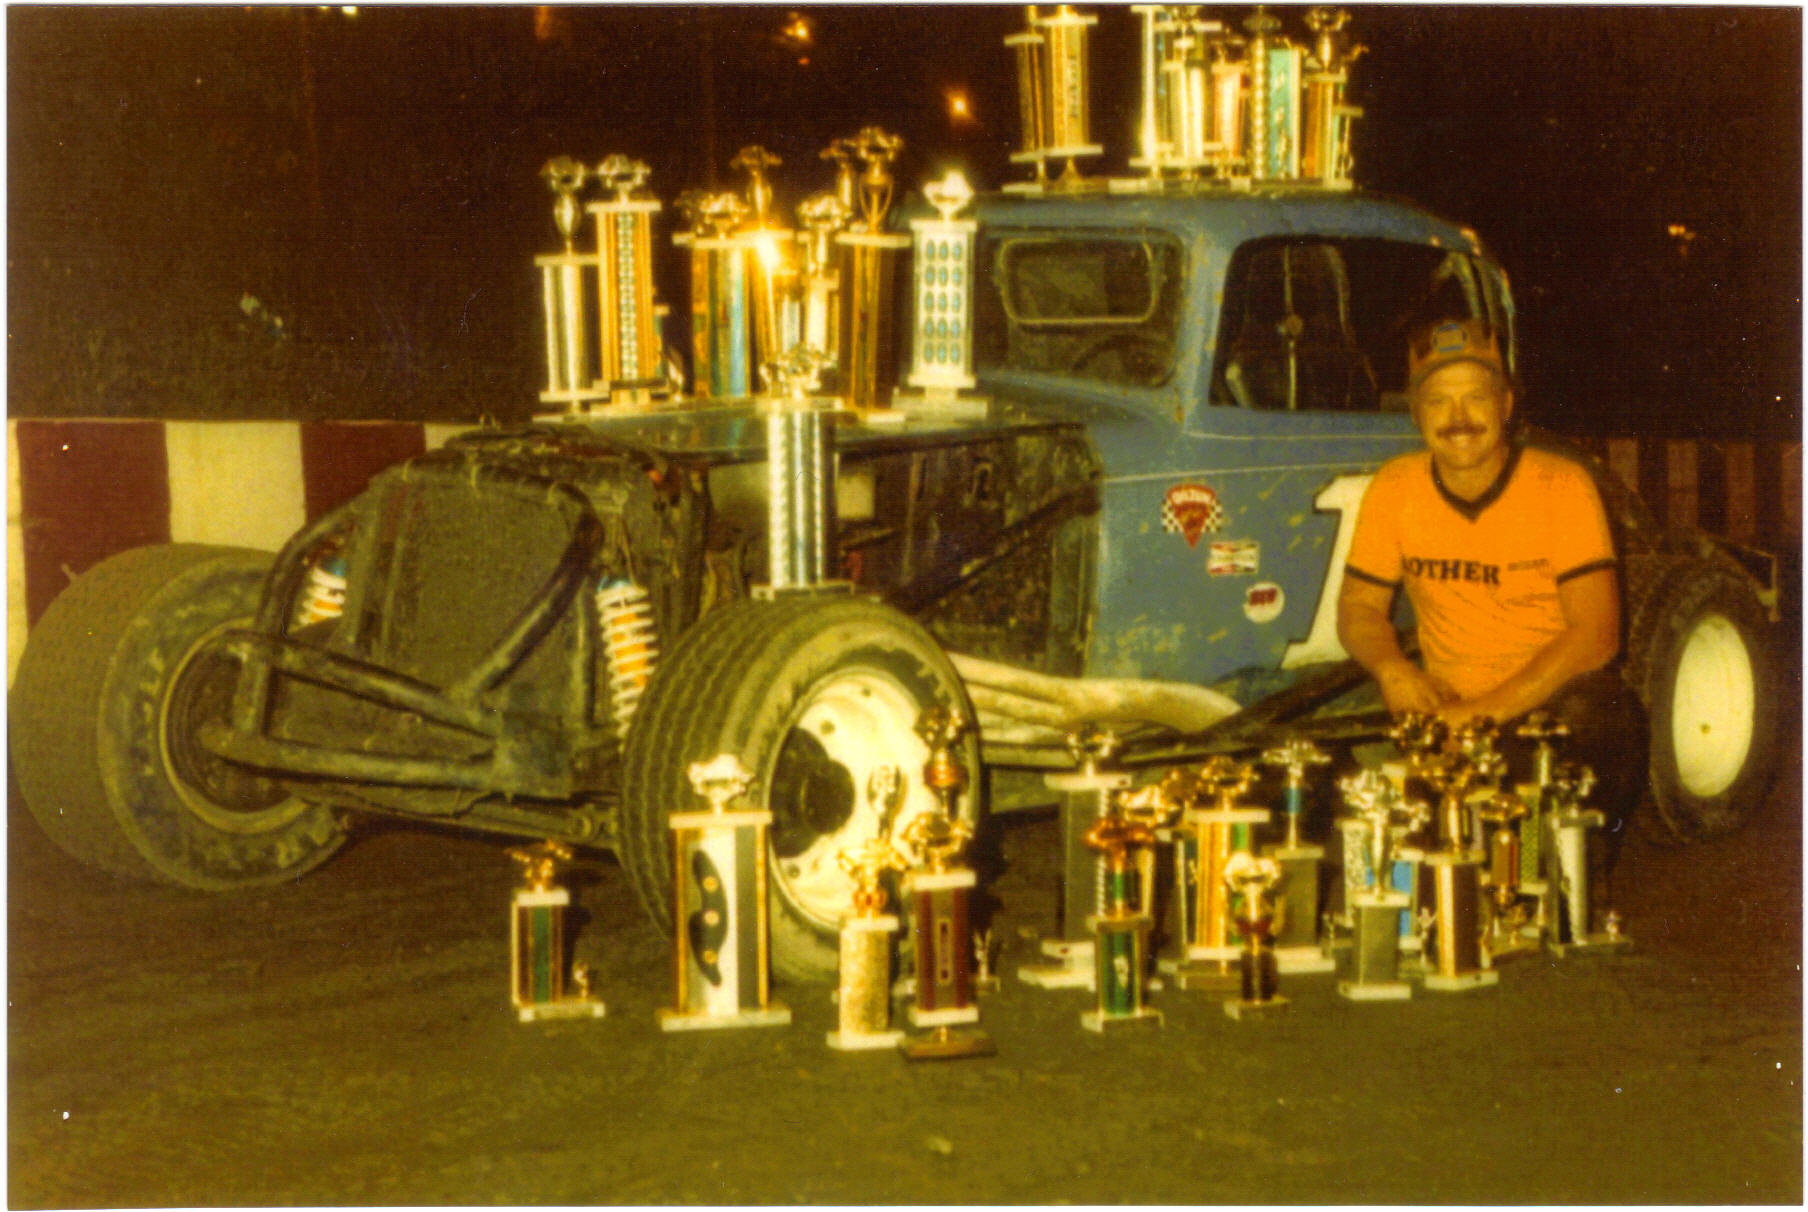 Brother_Eastman_Trophies_1Couope_GeoHill.JPG